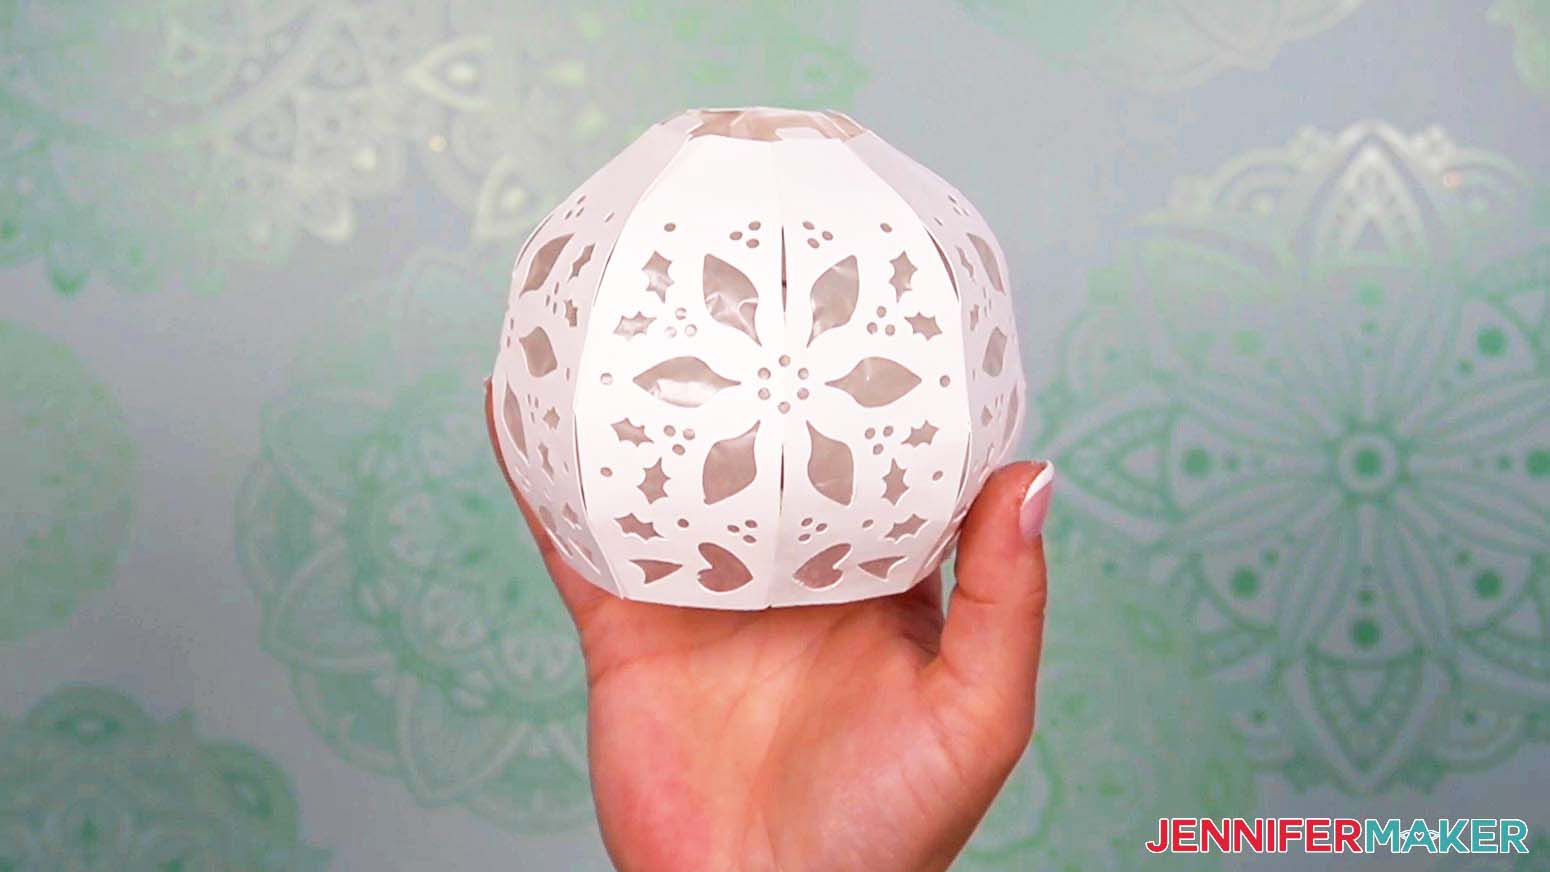 Once all the tabs are attached, the light up snowman's body pieces will form a sphere shape